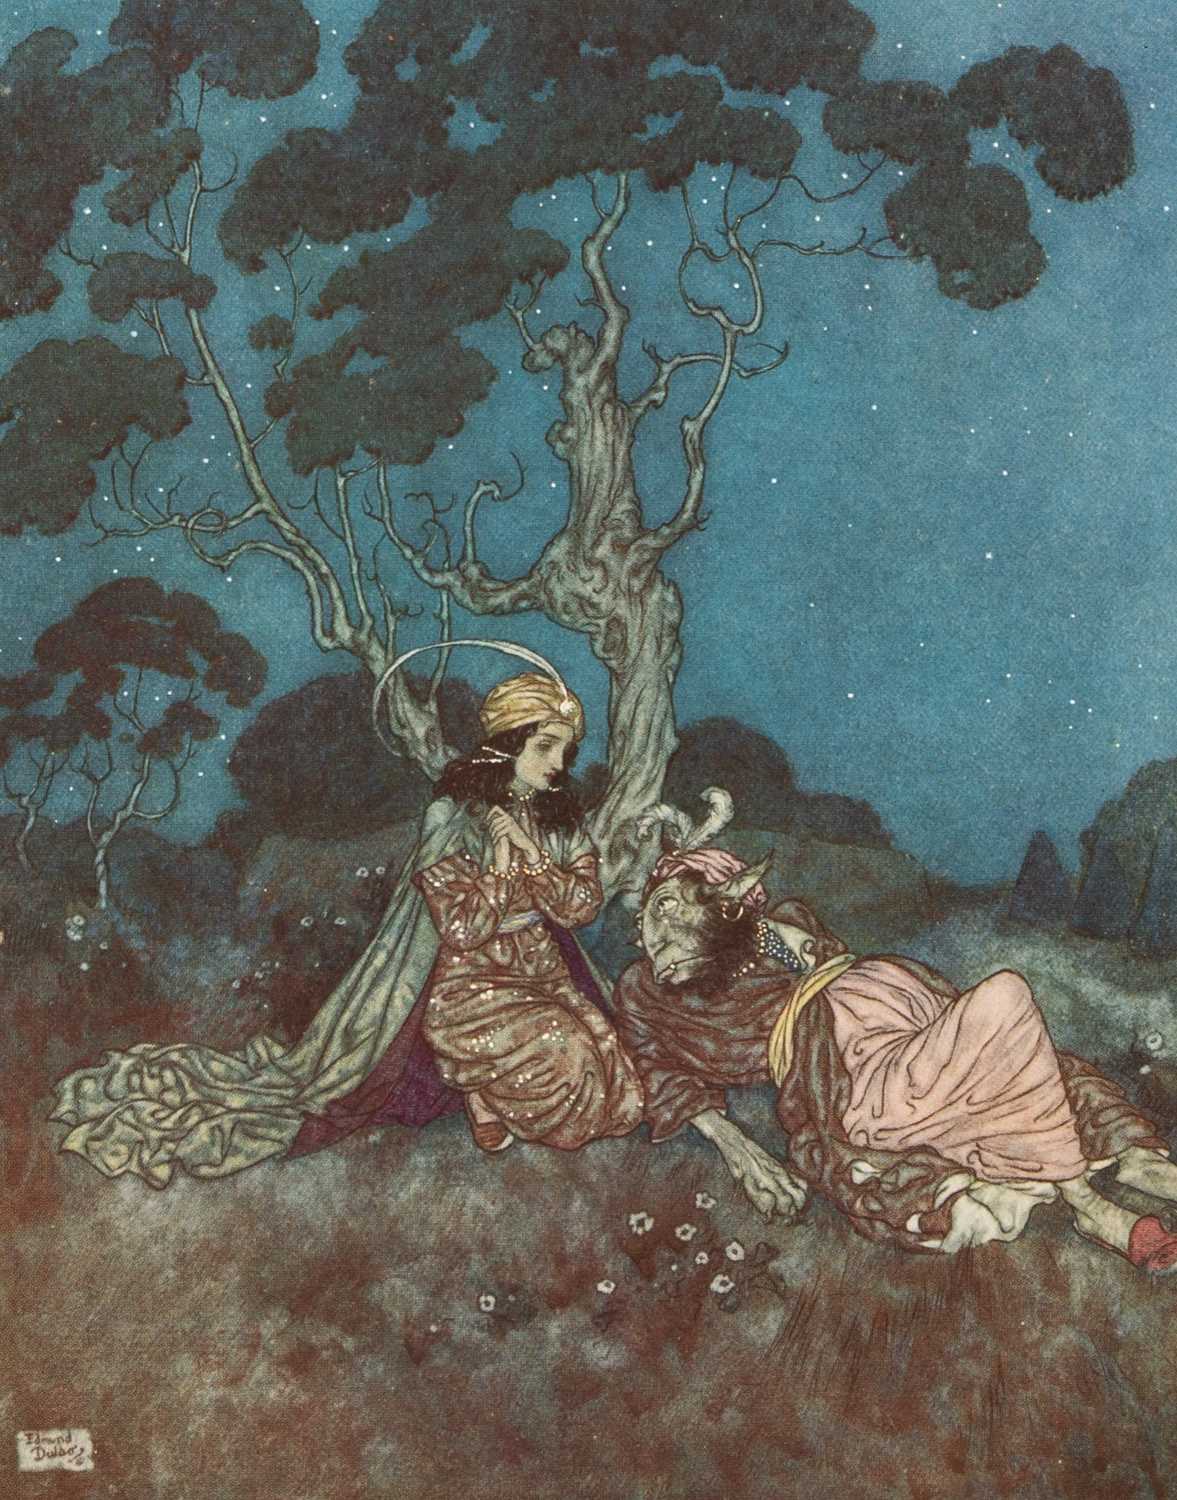 Quiller-Couch (Sir Arthur) The Sleeping Beauty and other fairy tales - Image 14 of 37